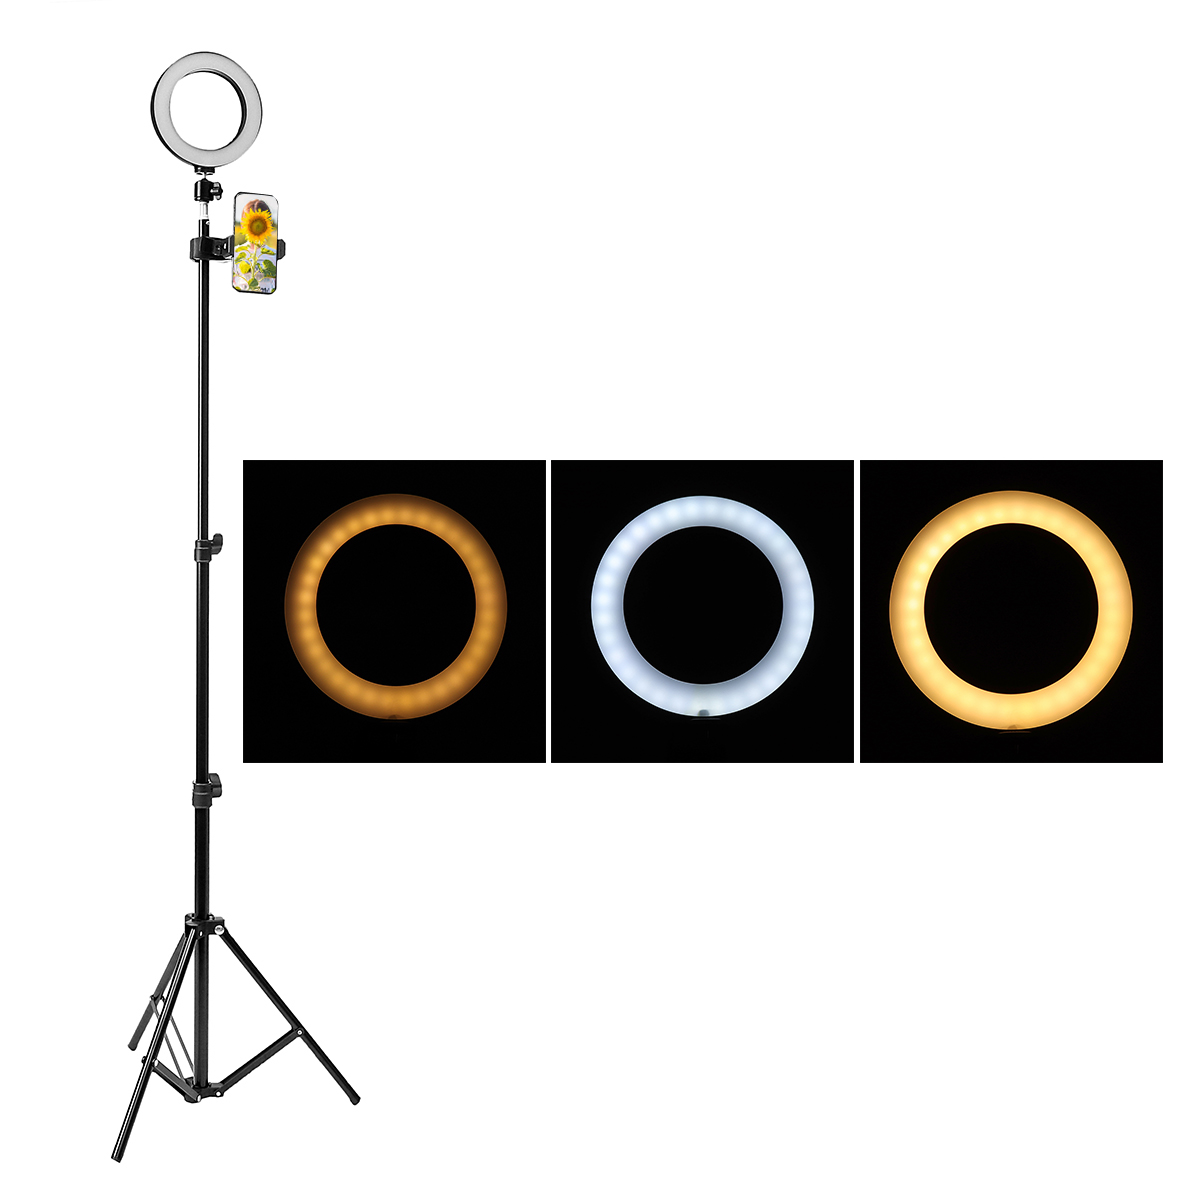 16cm-LED-Video-Ring-Light-5500K-Dimmable-with-160cm-Adjustable-Light-Stand-for-Youtube-Tiktok-Live-S-1403937-1